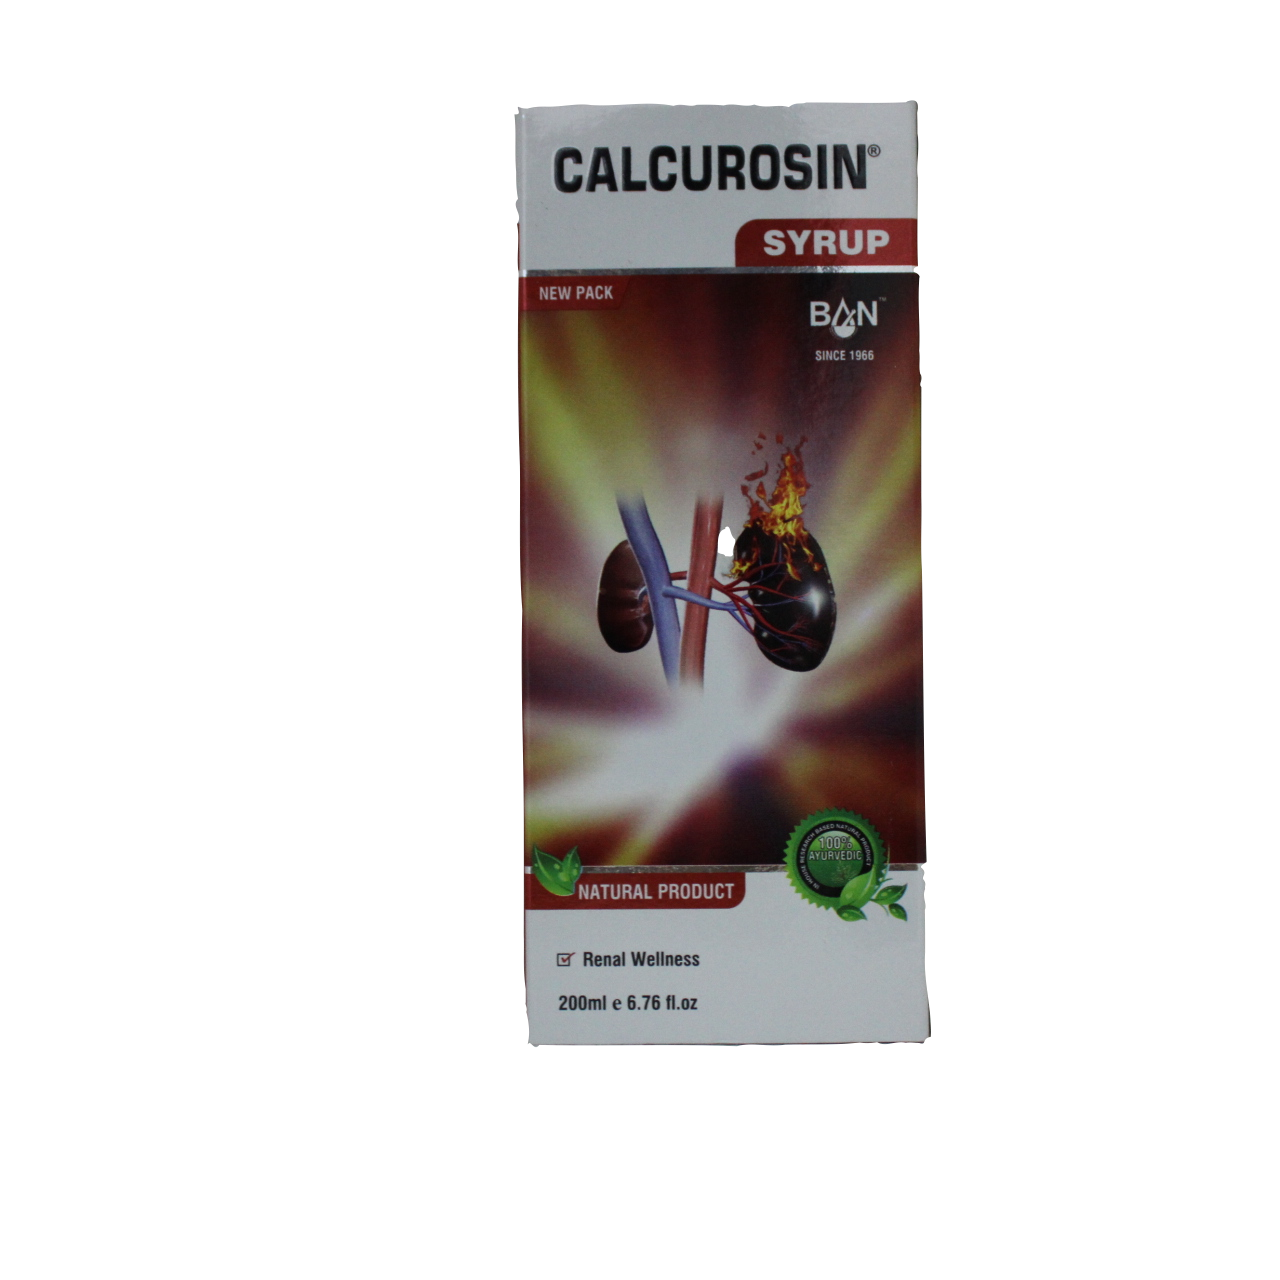 Shop Calcurosin Syrup 200ml at price 145.00 from Banlabs Online - Ayush Care